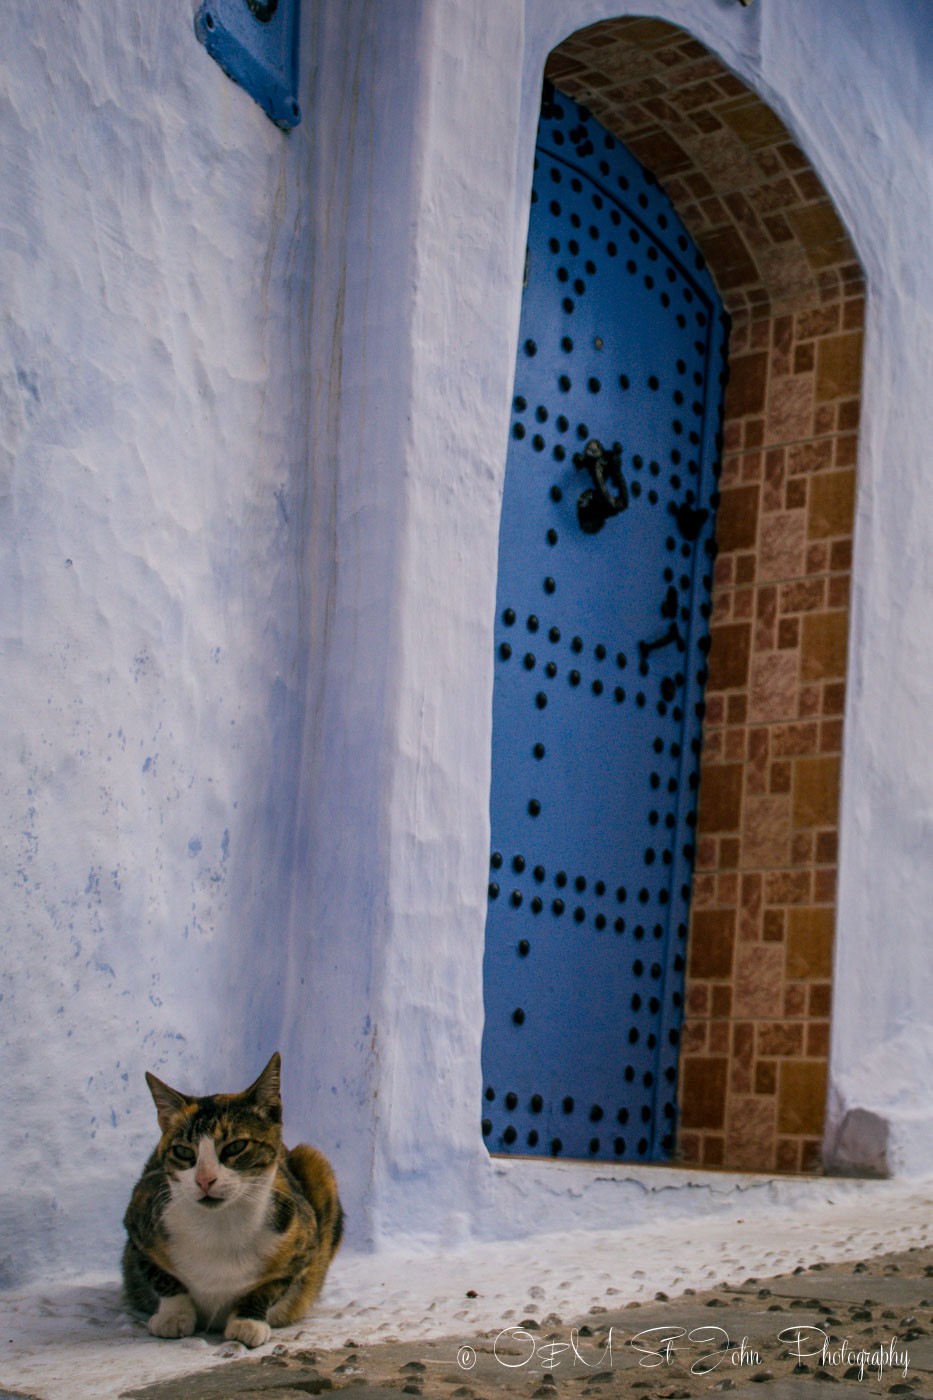 Cats in Morocco